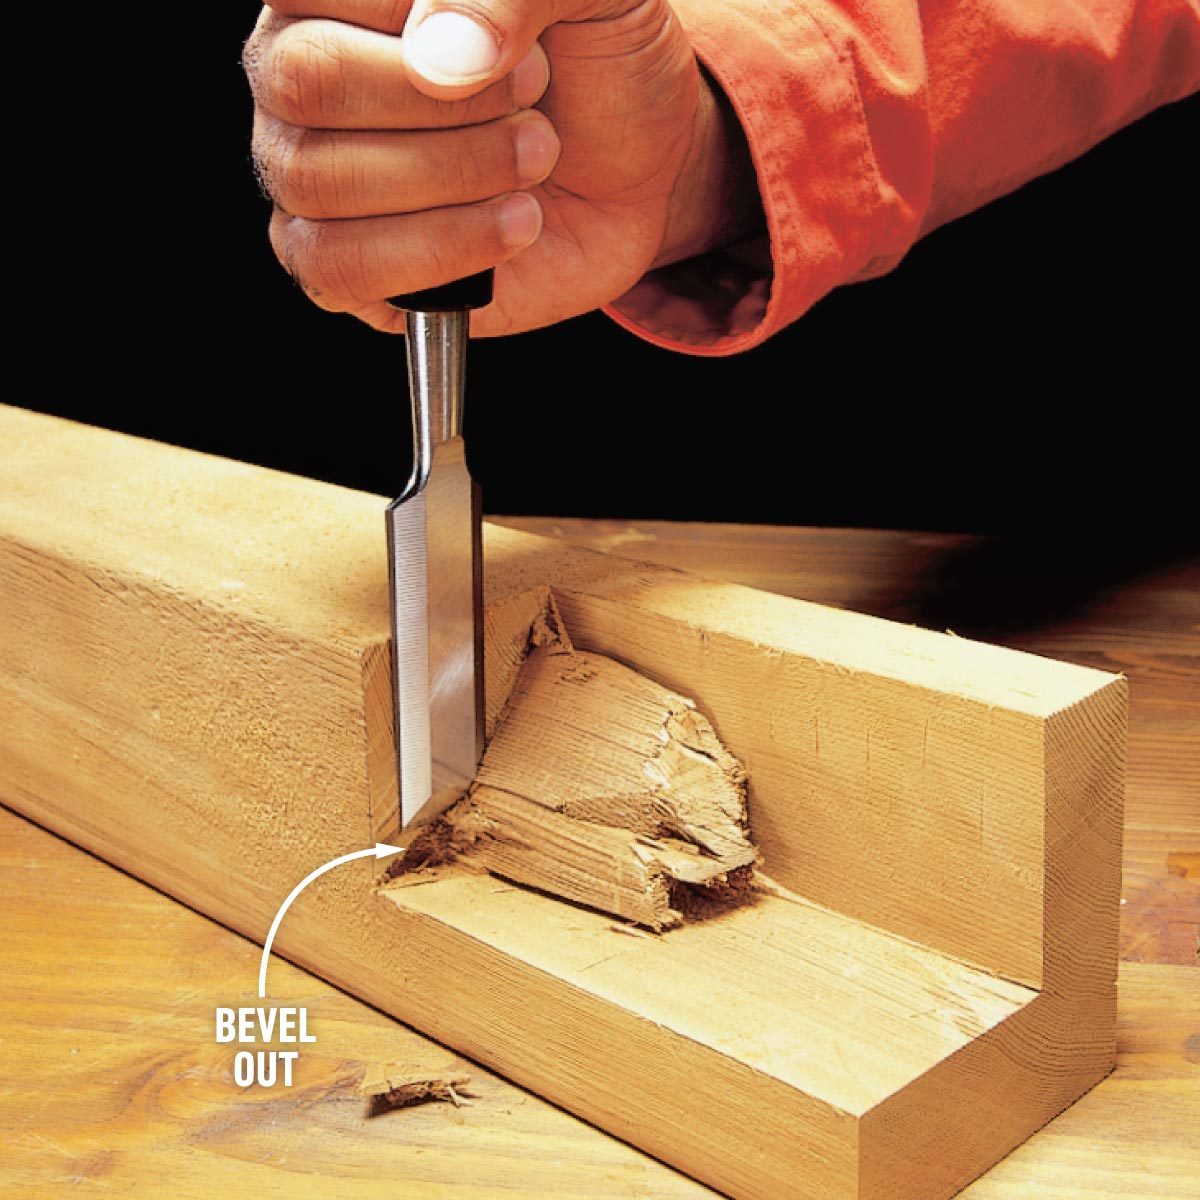 How To Use A Wood Chisel Remove chunks of wood